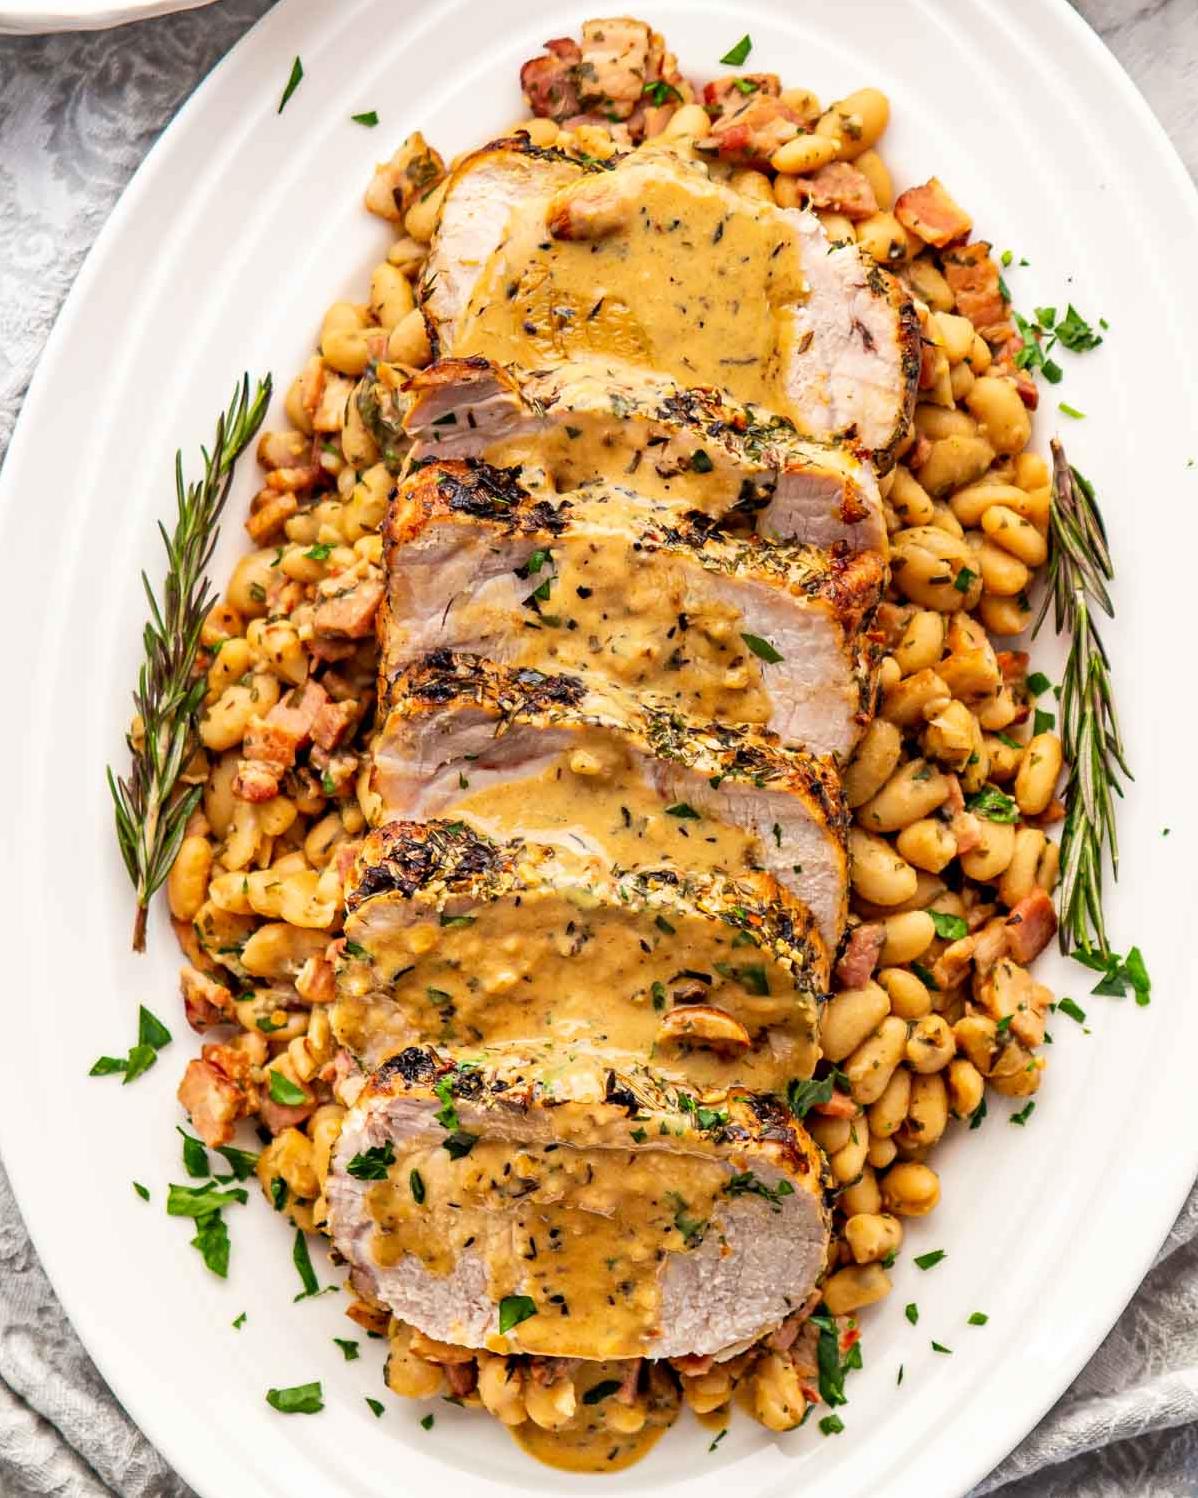  The secret to a delicious pork loin? Southern spices